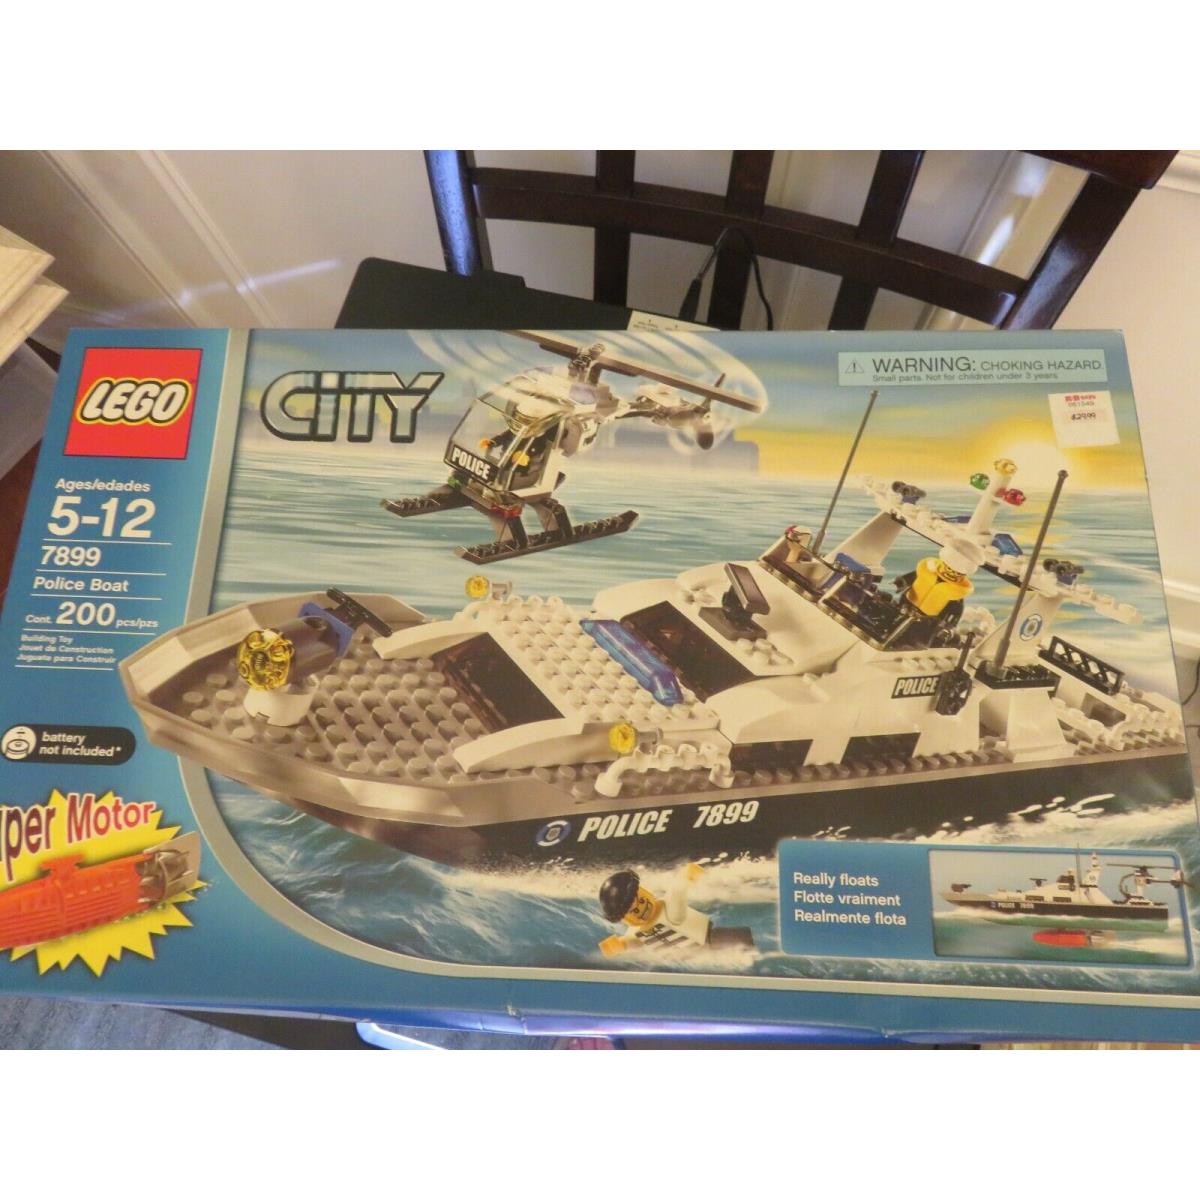 Lego City Police Boat Set 7899 - and Complete with Super Motor